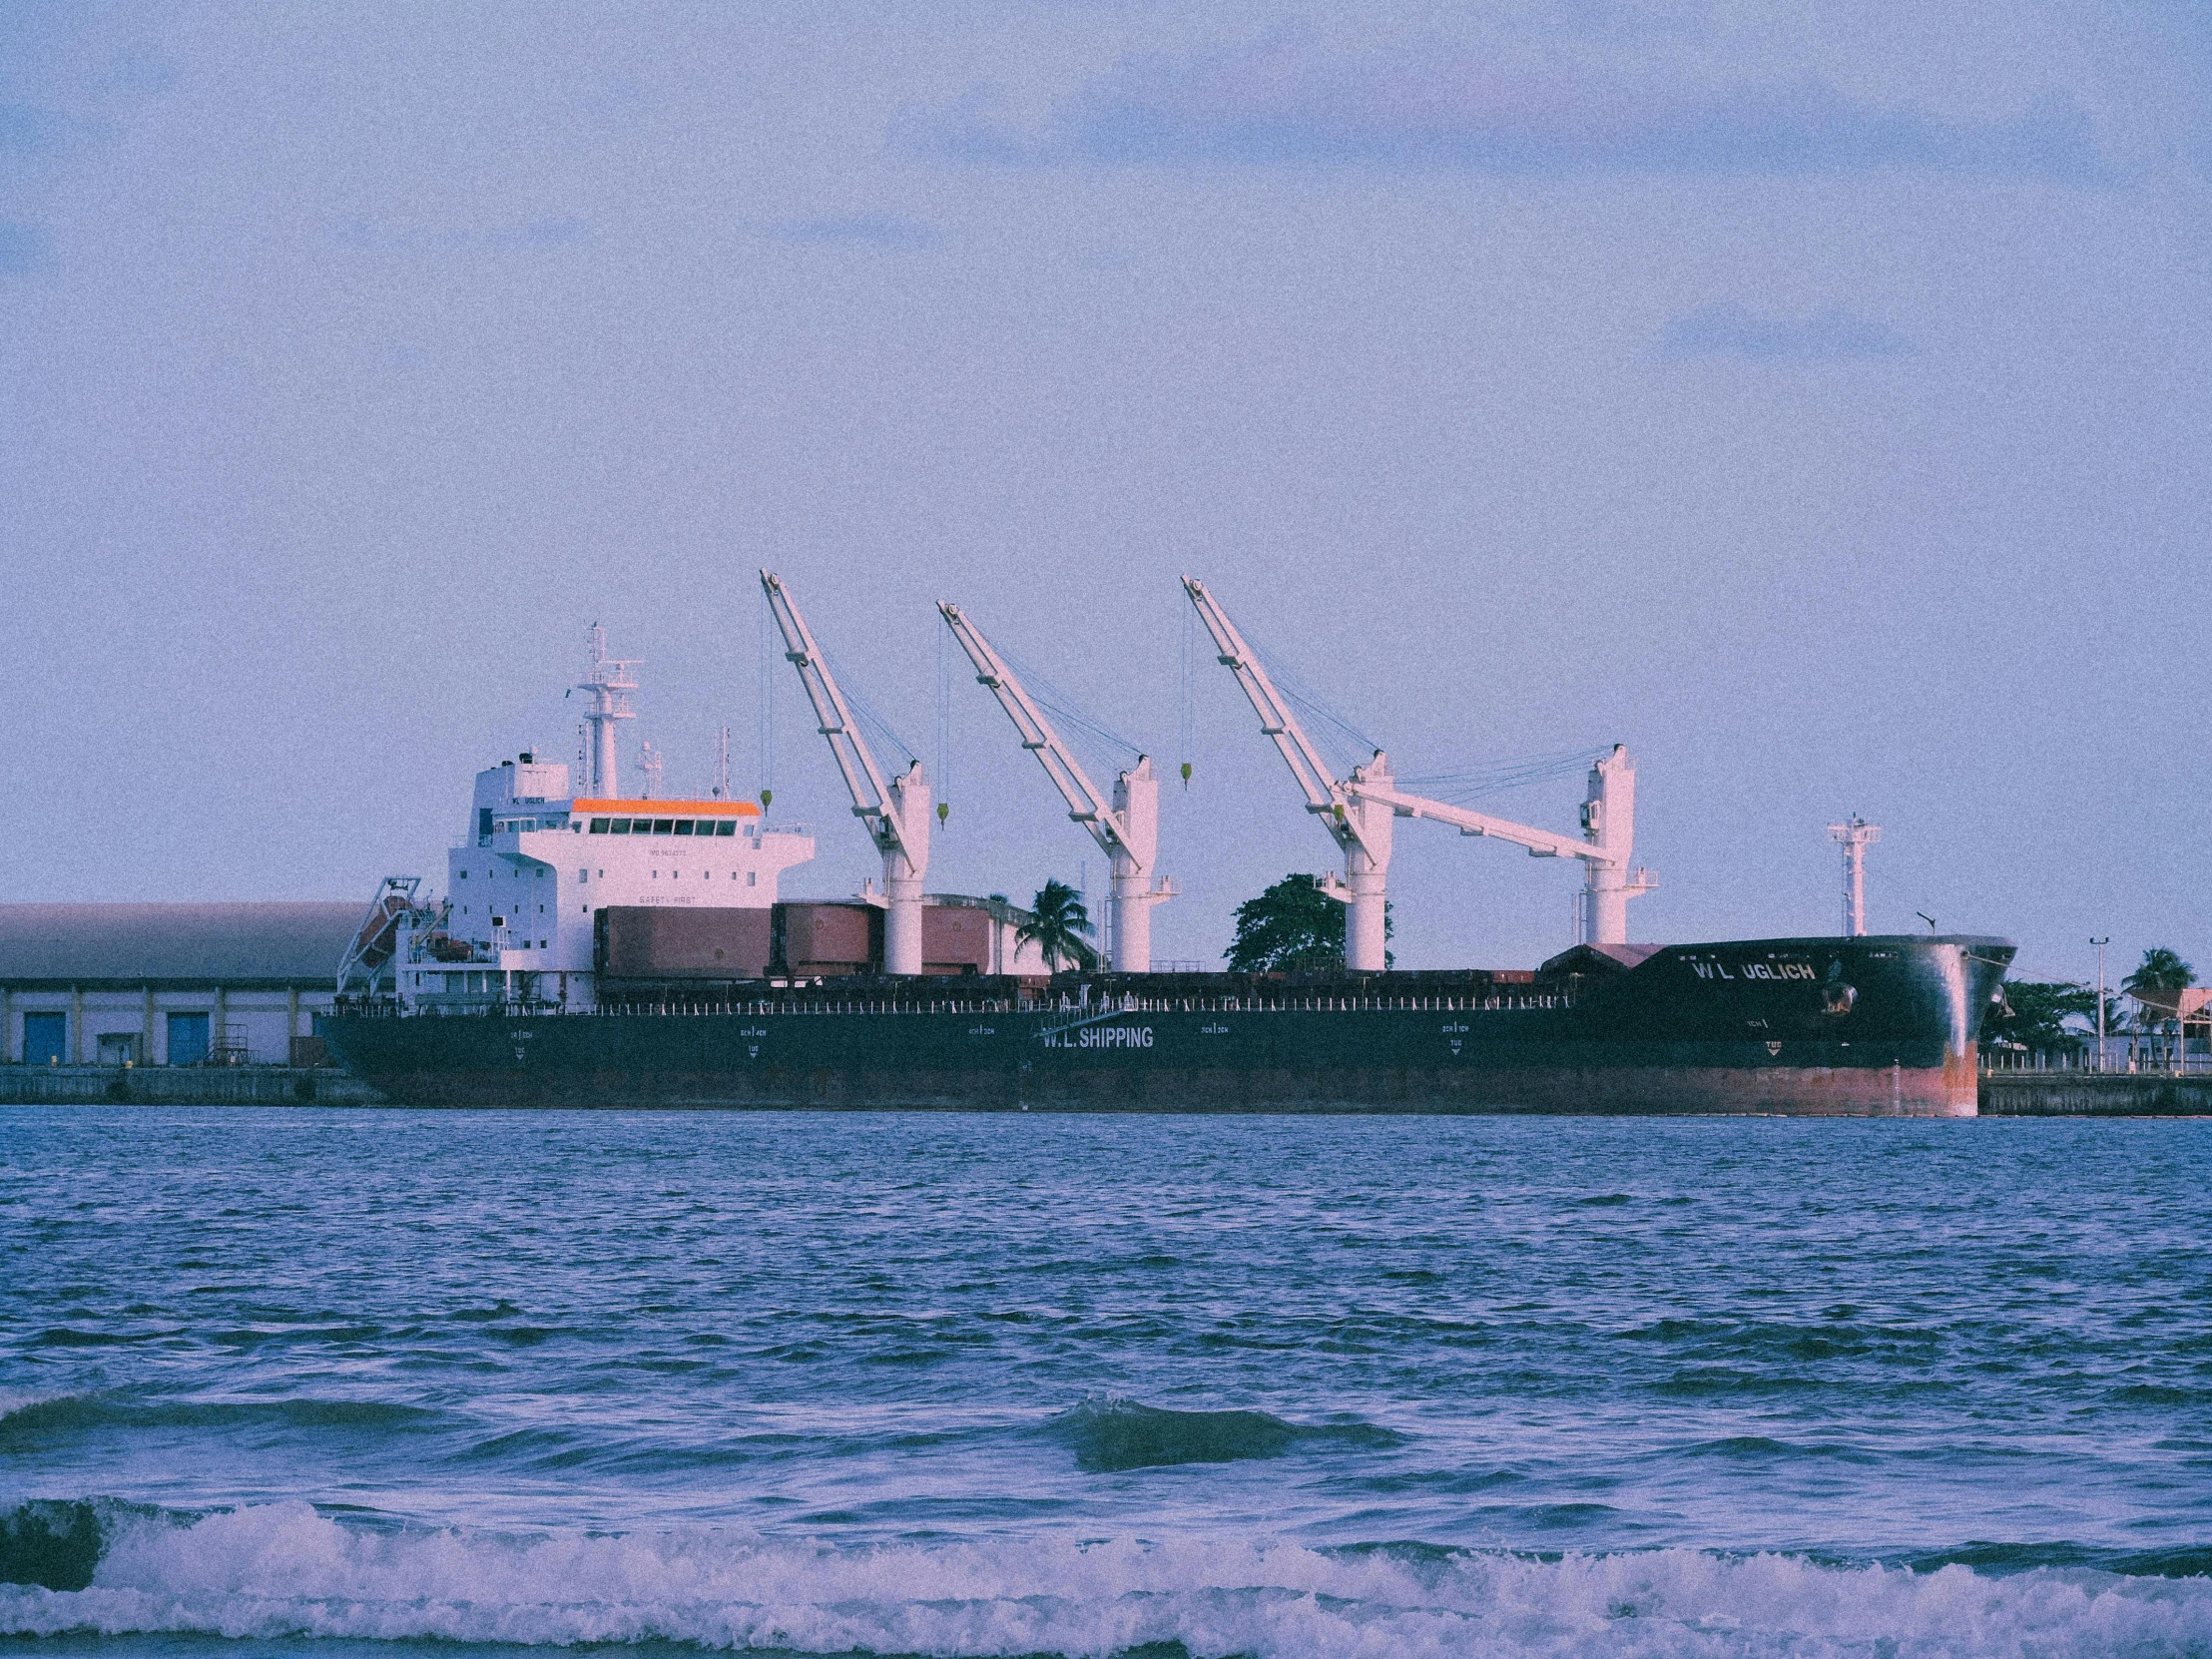 large cargo ship loaded with containers moving along the ocean